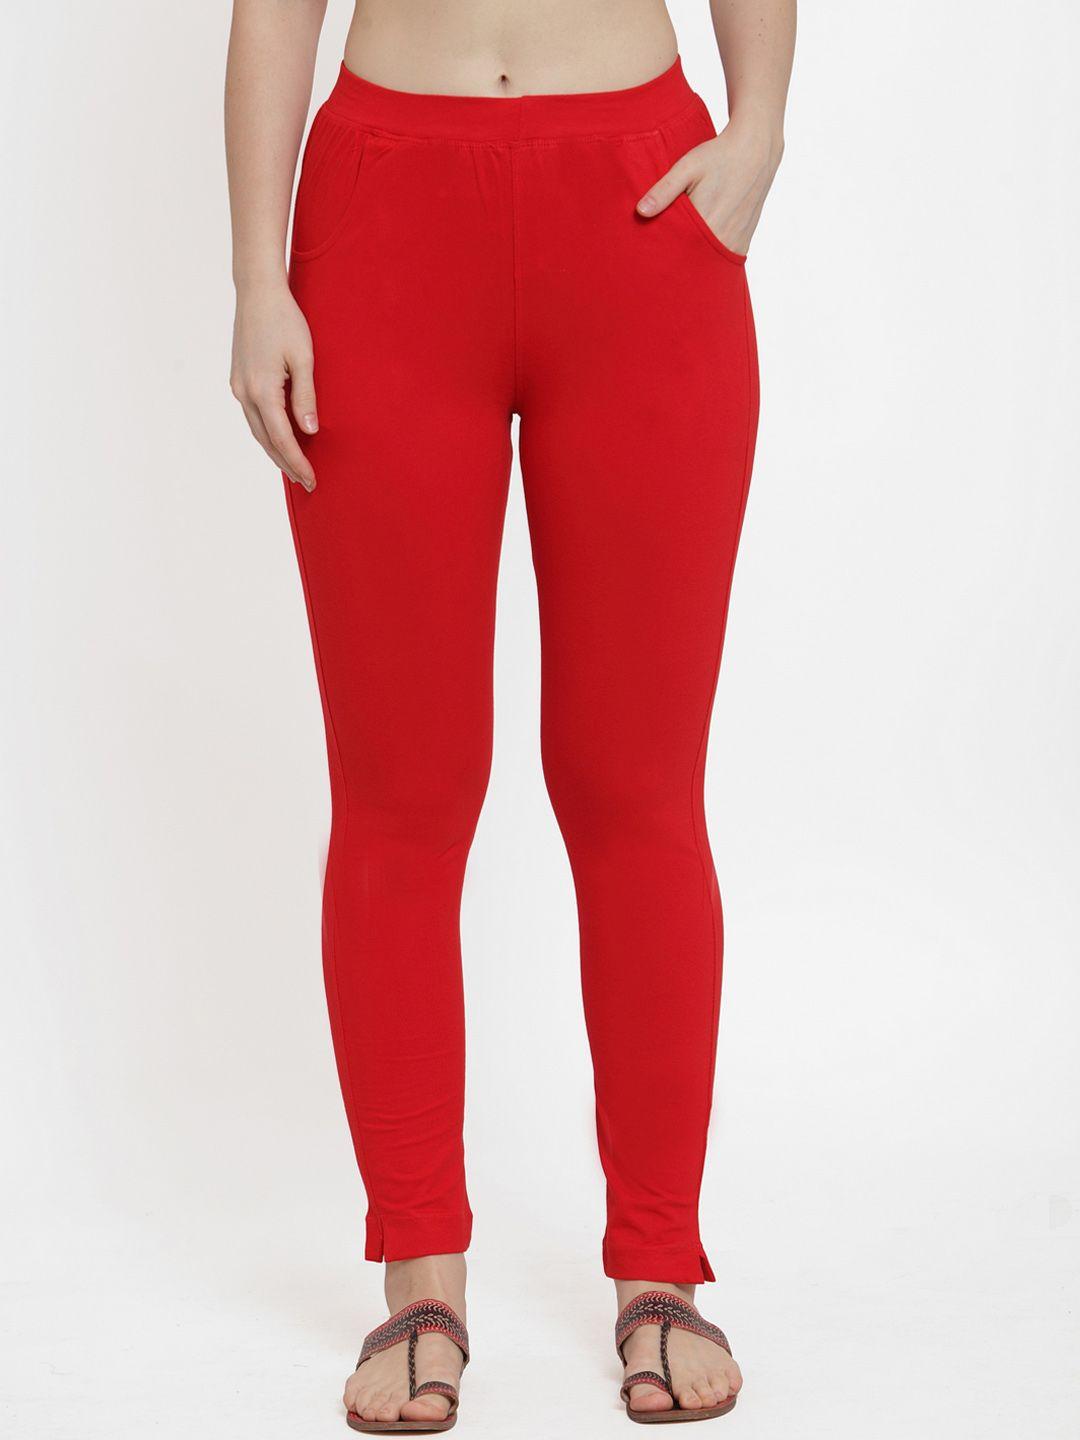 tag 7 women red solid ankle-length leggings